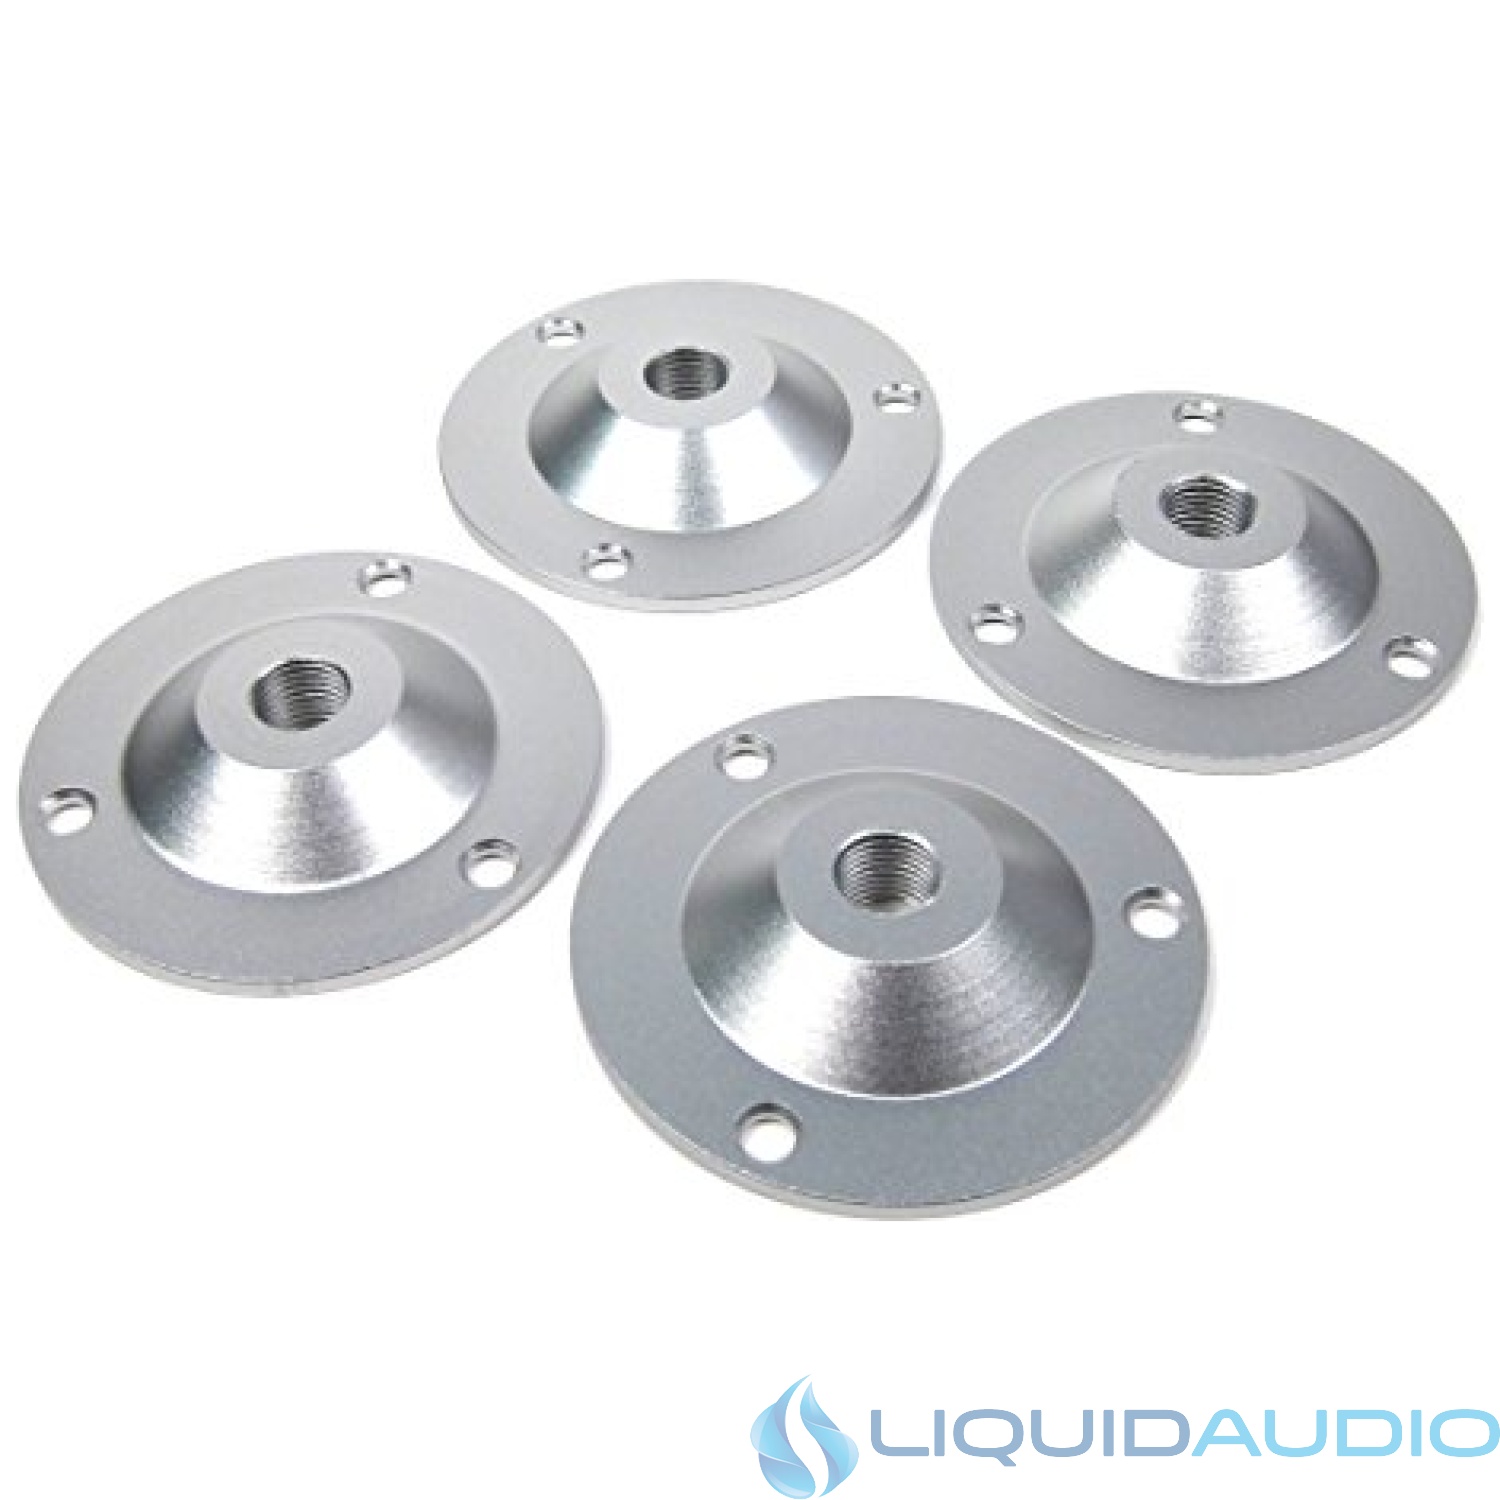 IsoAcoustics: GAIA B&W Mounting Plates (4-Pack)